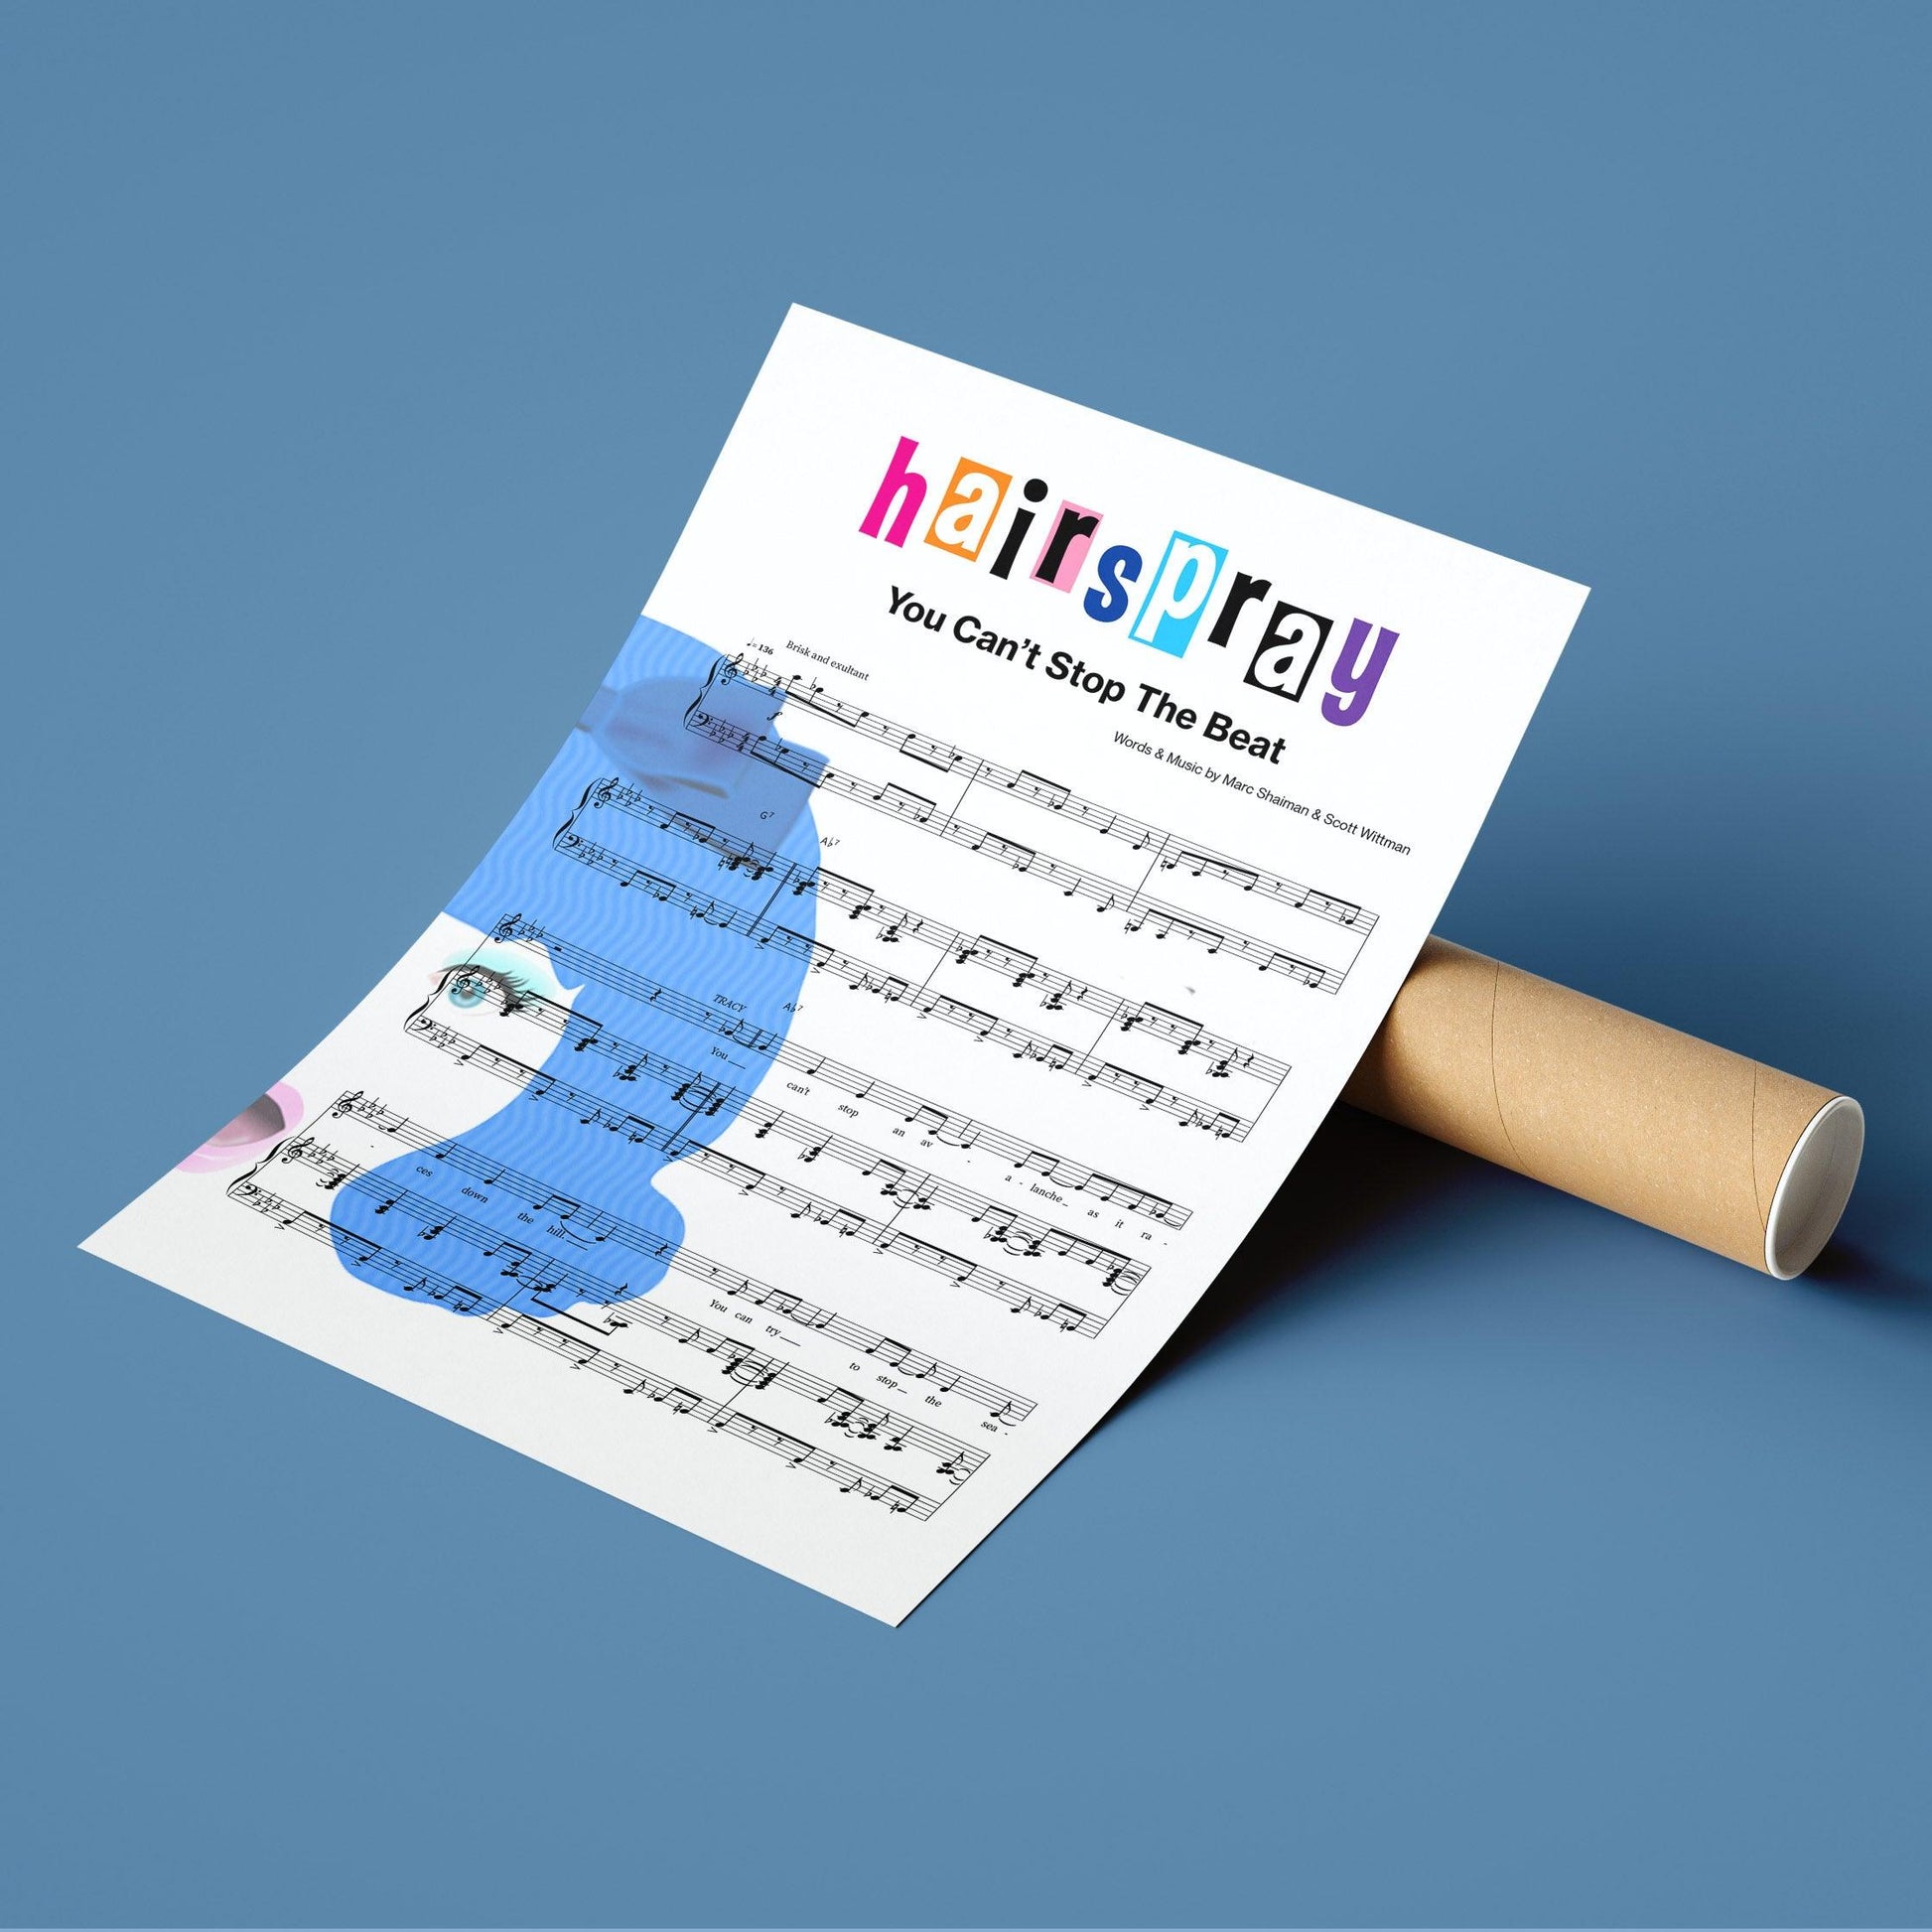 Hairspray - You Can’t Stop The Beat Print | Song Music Sheet Notes Print  Everyone has a favorite Song lyric prints and  Hairspray now you can show the score as printed staff. The personal favorite song lyrics art shows the song chosen as the score.